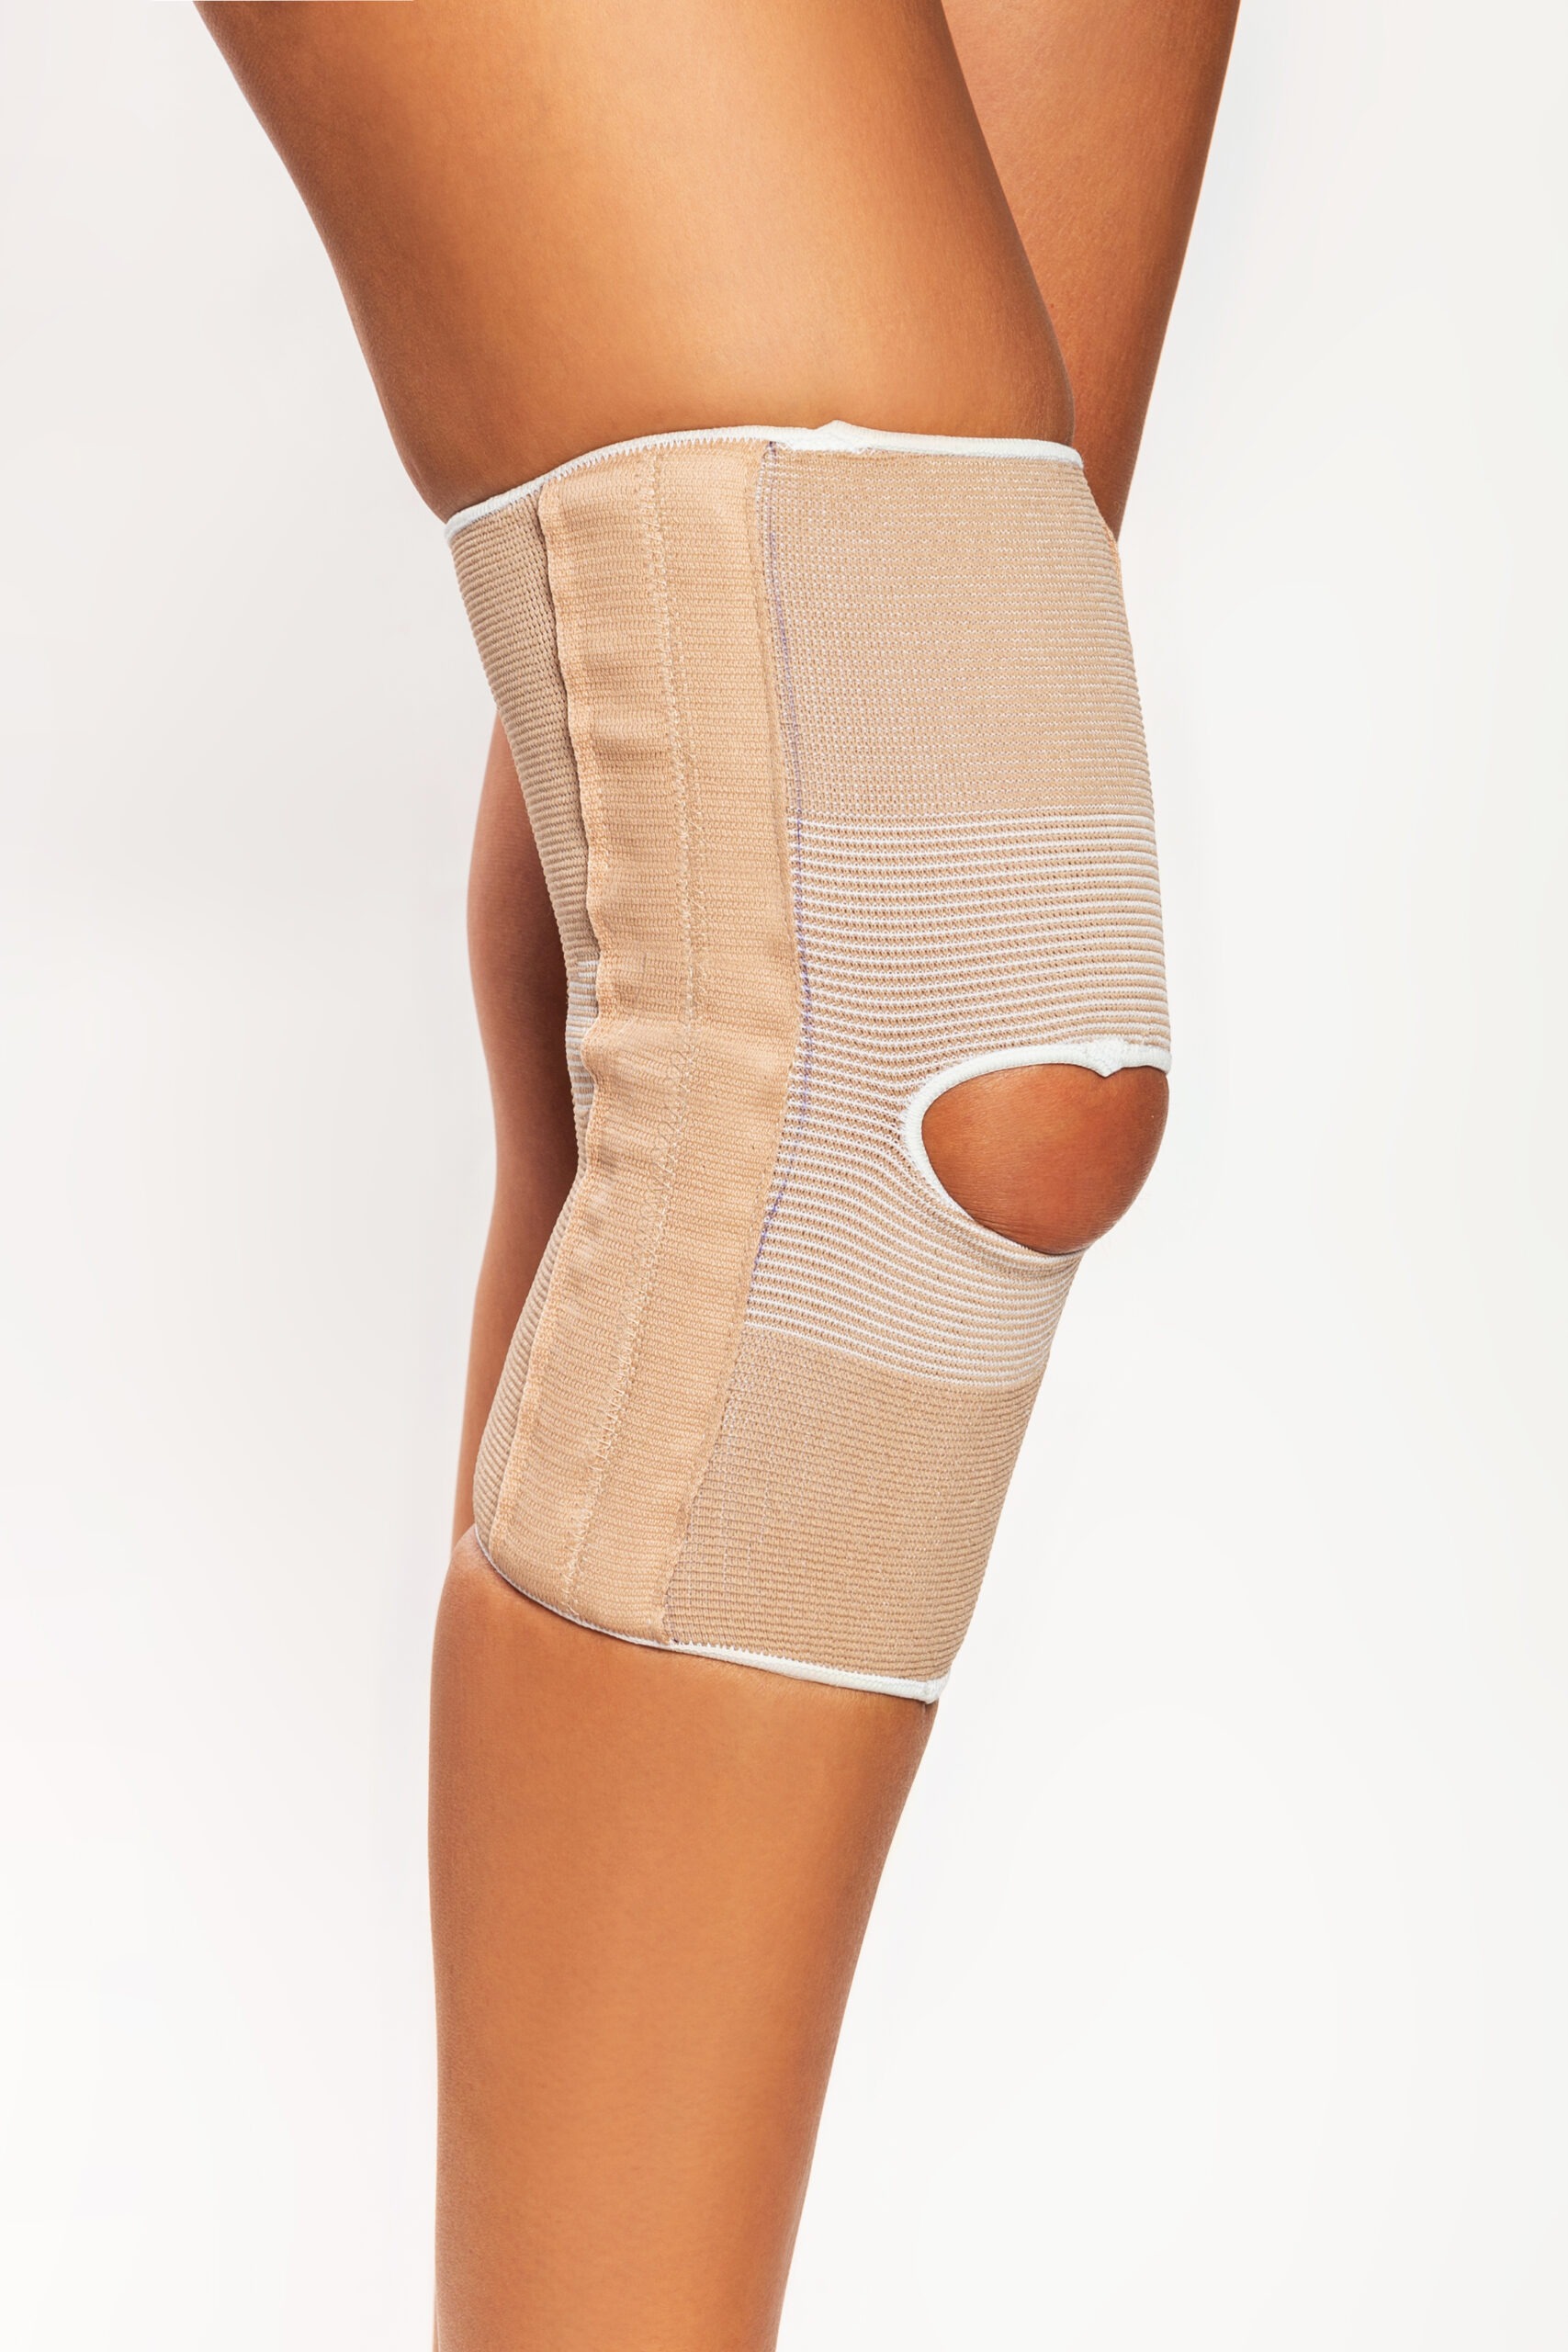 Elastic Knee Support W/ Open Patella-Lateral Stays Afrodite